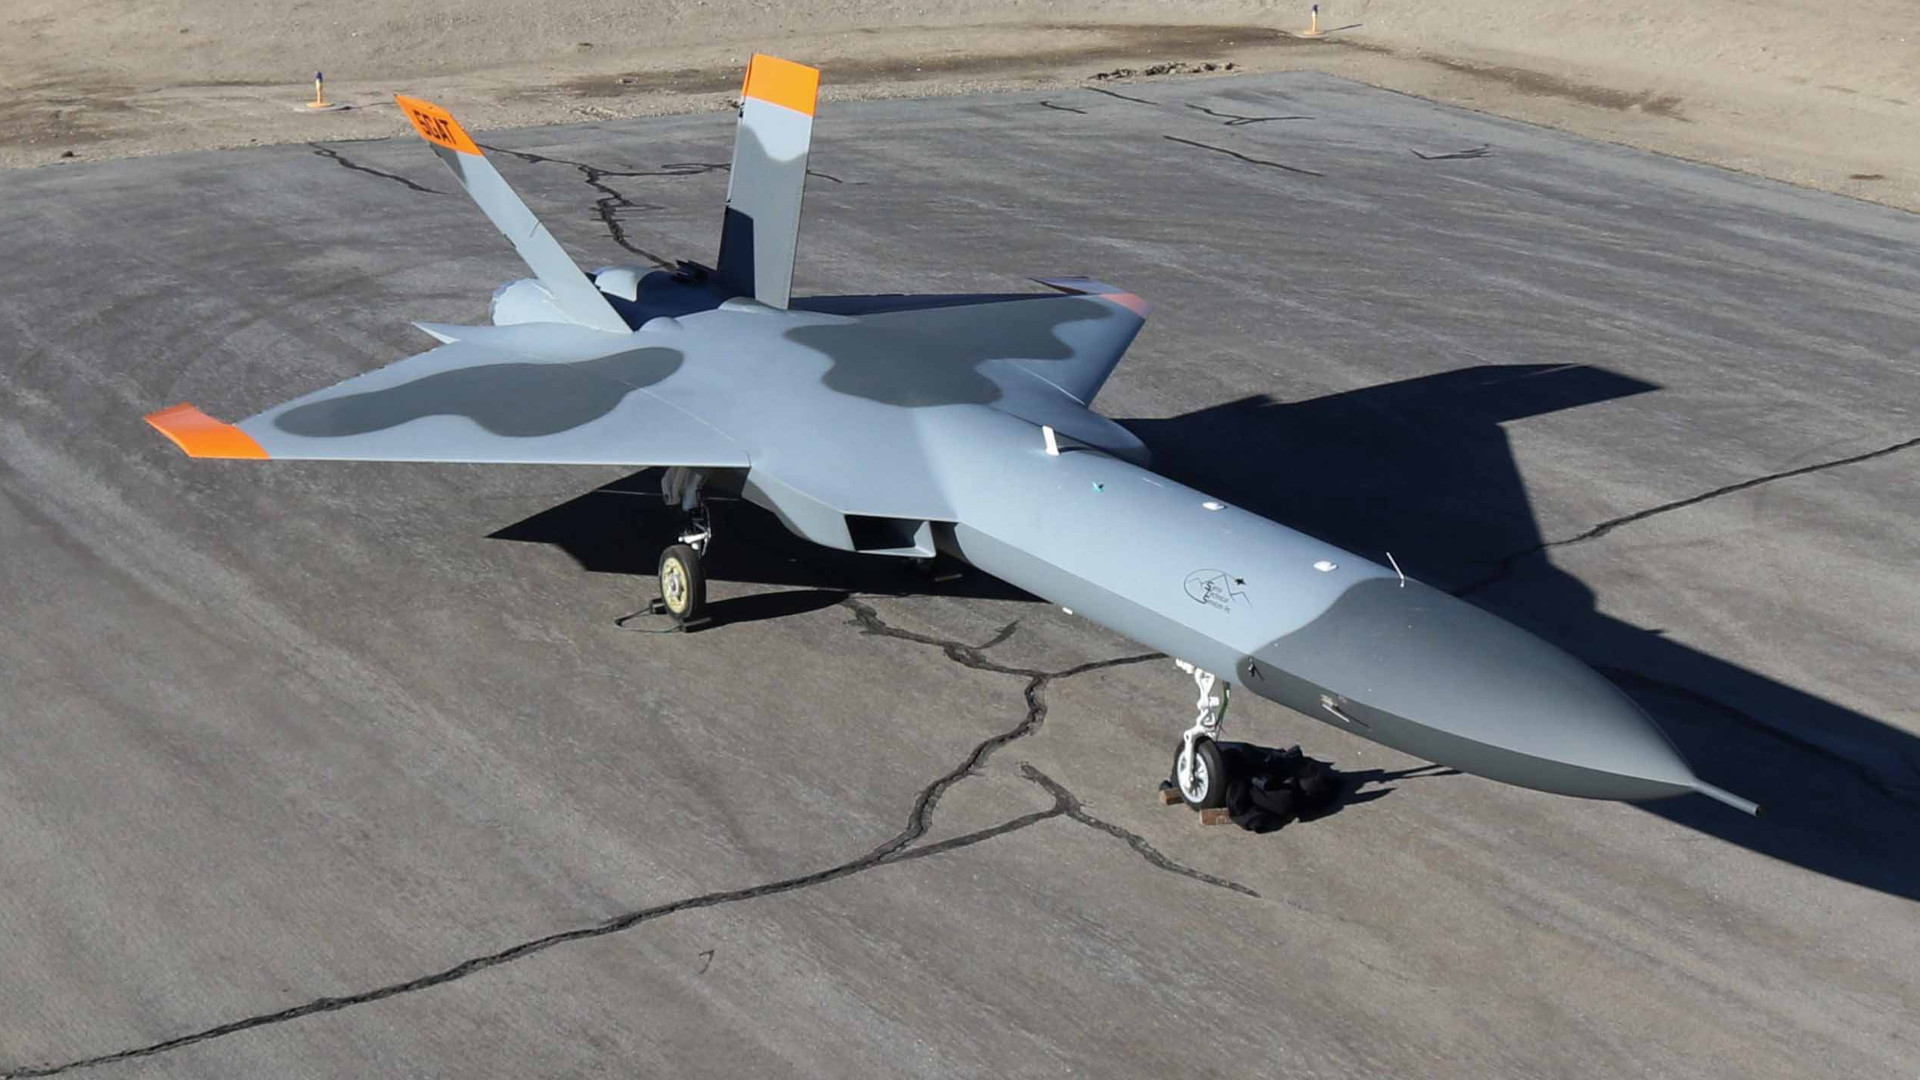 Stealthy Target Drones Sought As QF-16 Program Winds Down